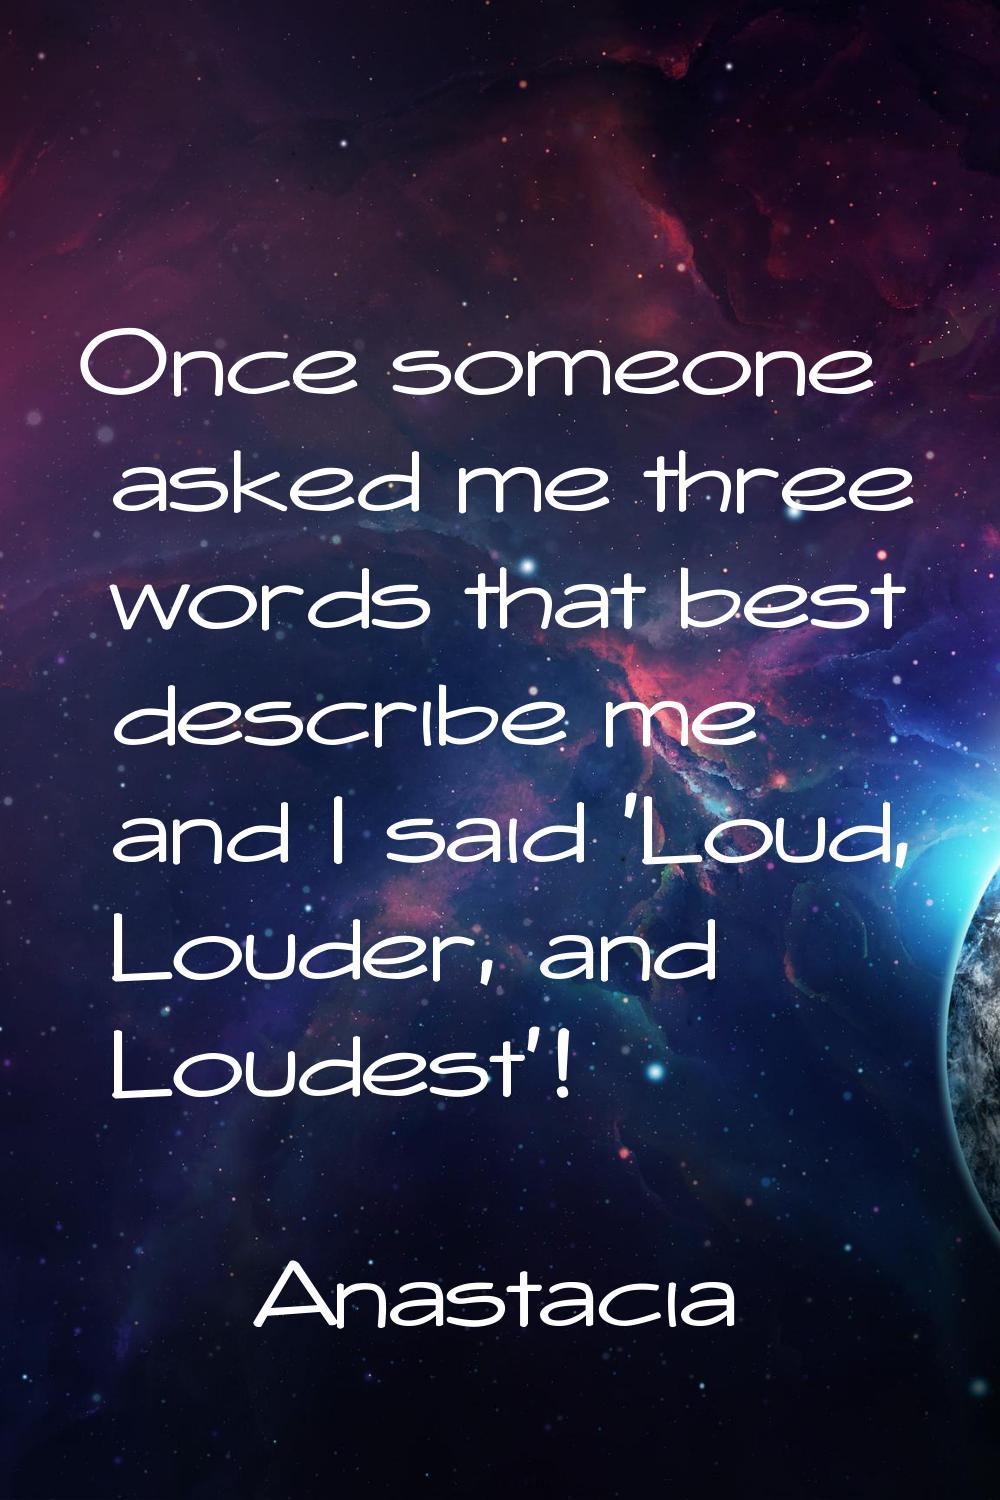 Once someone asked me three words that best describe me and I said 'Loud, Louder, and Loudest'!